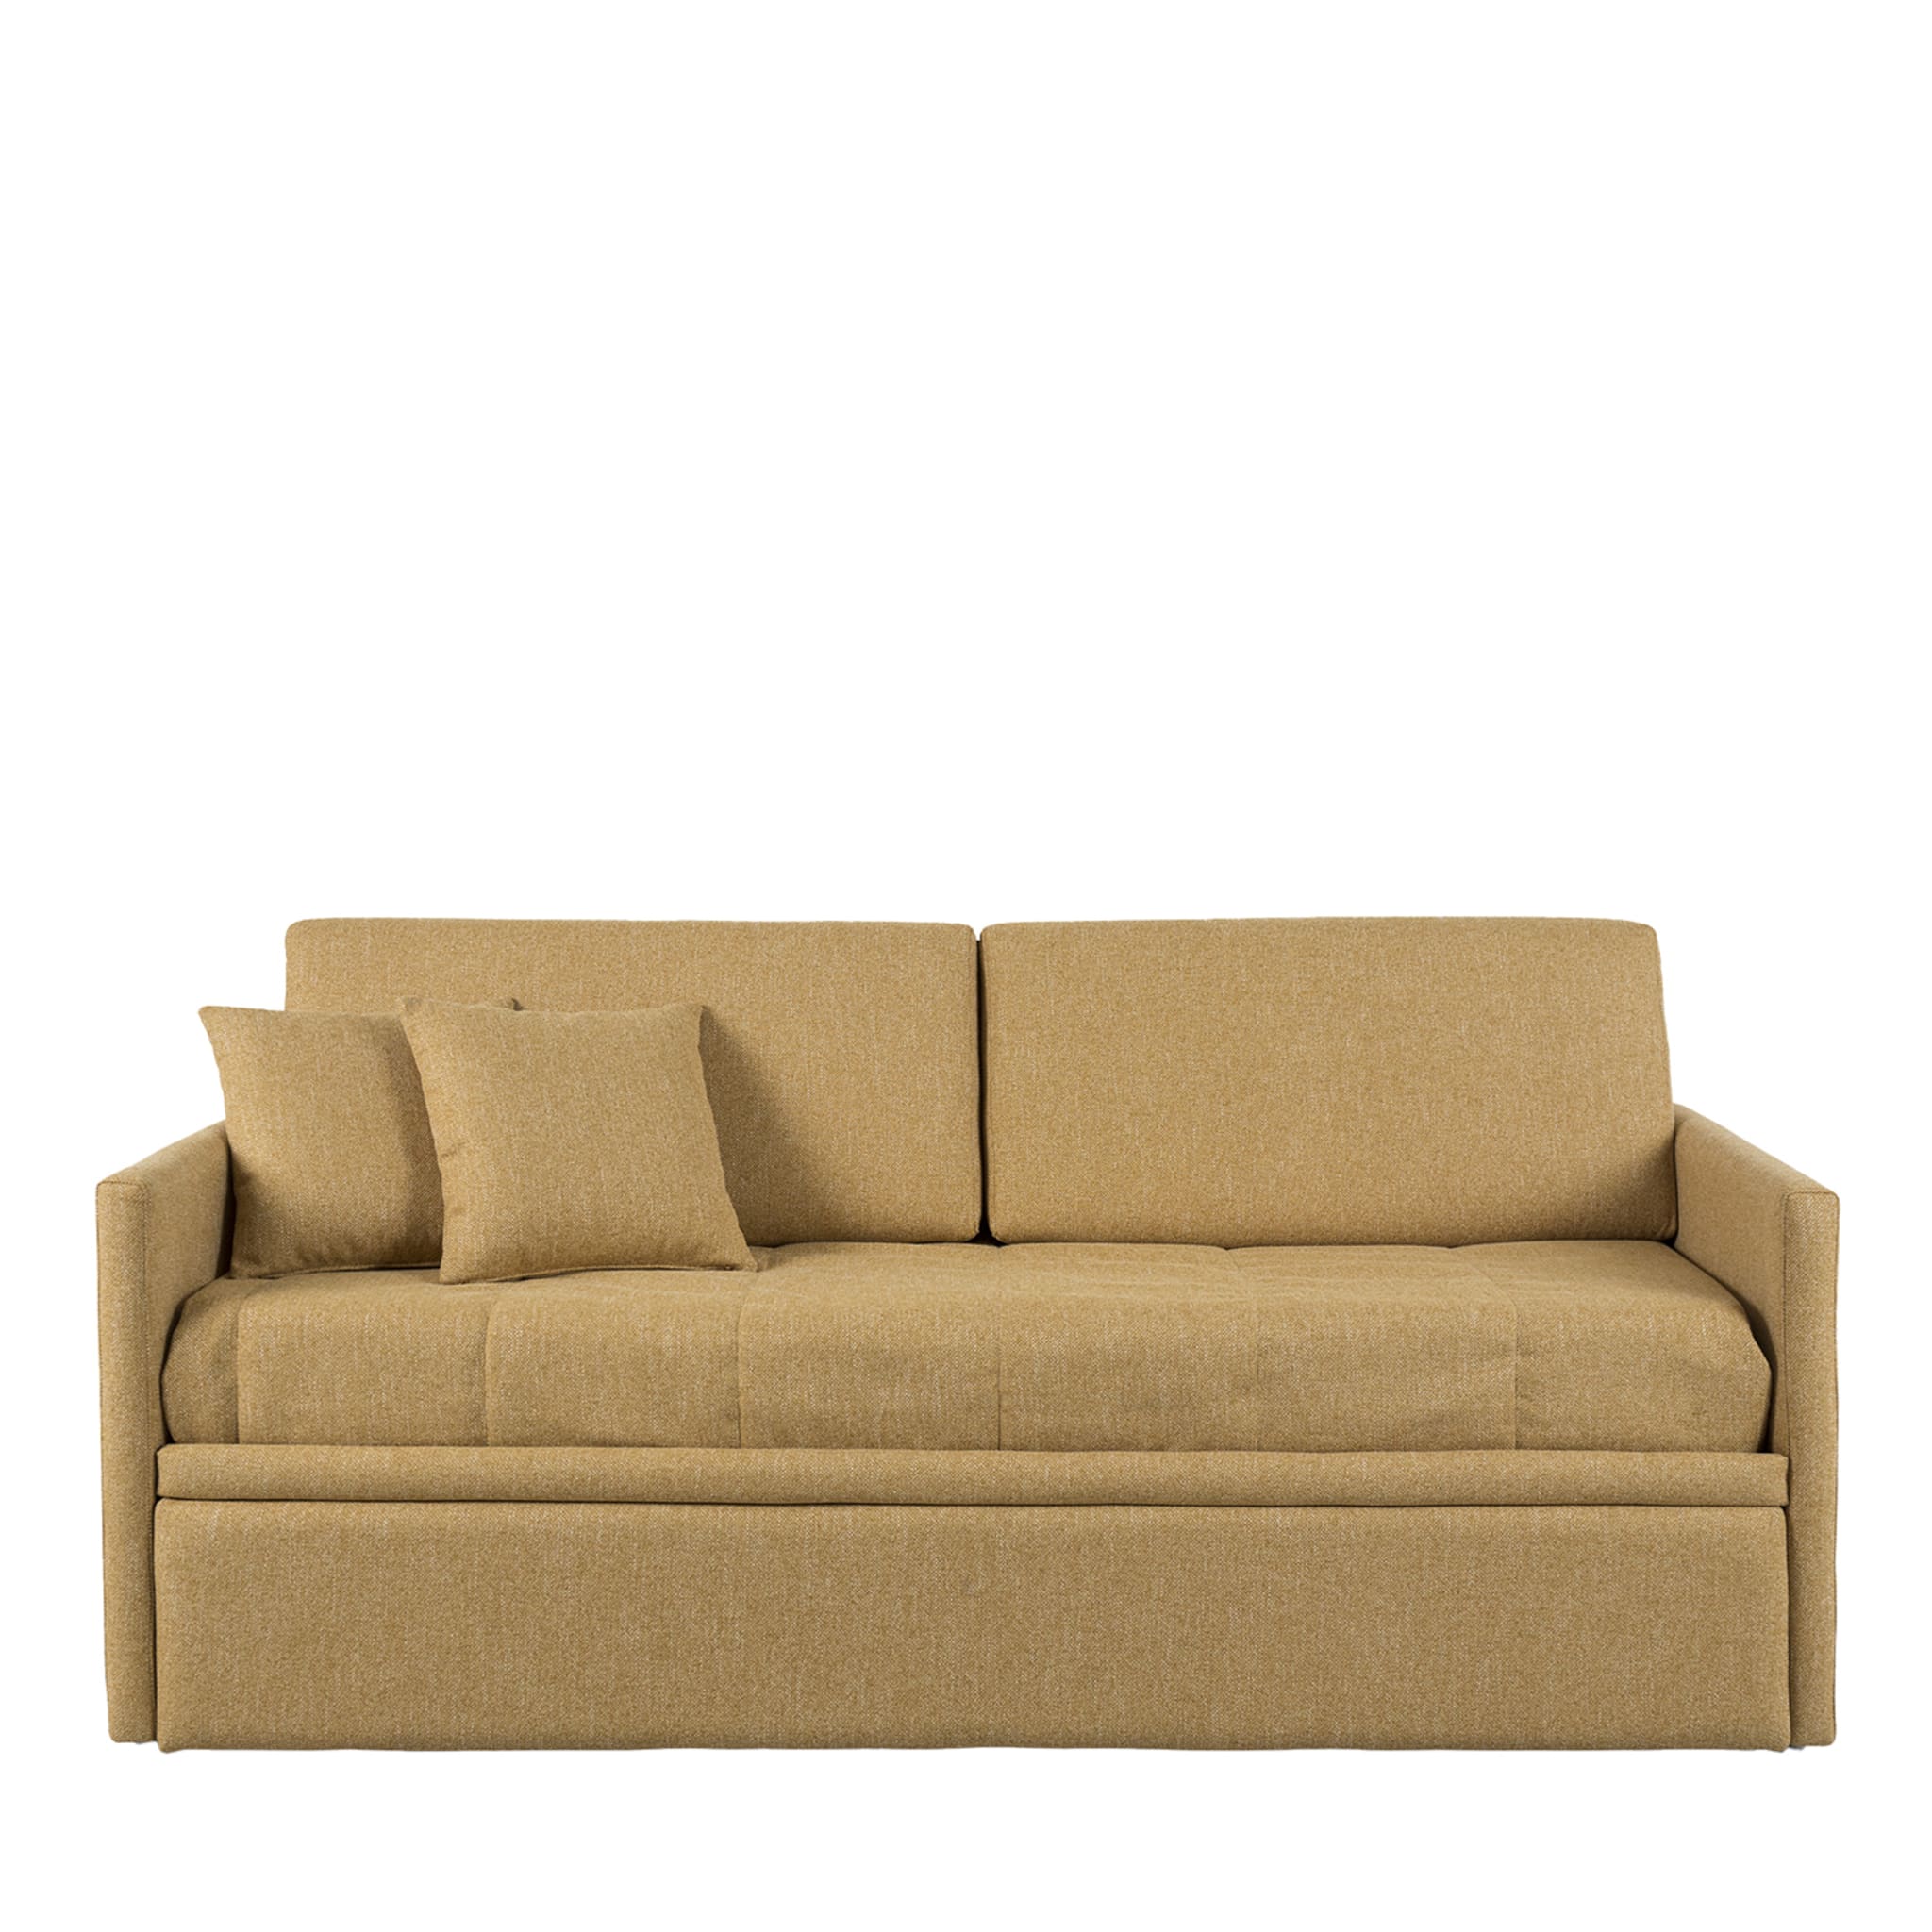 Giselle Mustard Double Sofa Bed - Main view